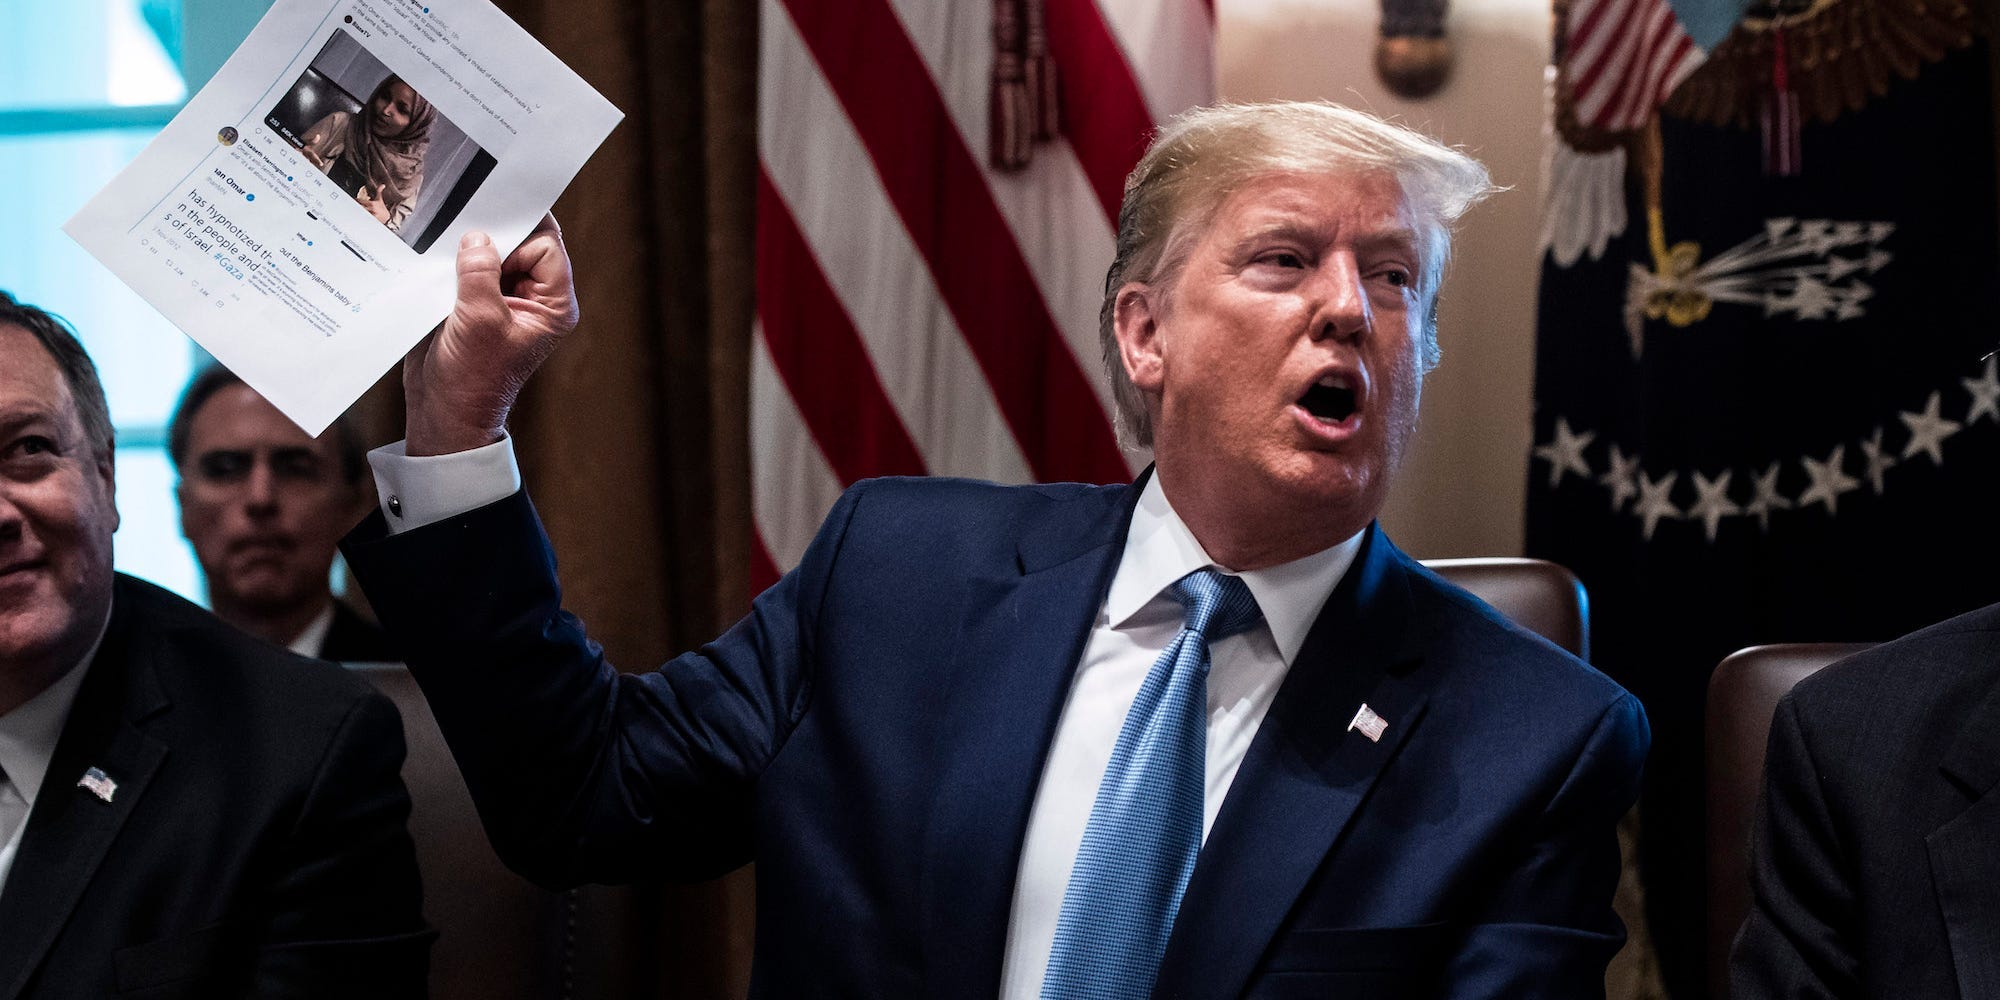 Former President Donald Trump holds up a printed-out tweet about Rep. Ilhan Omar during a cabinet meeting at the White House on July 16, 2019.